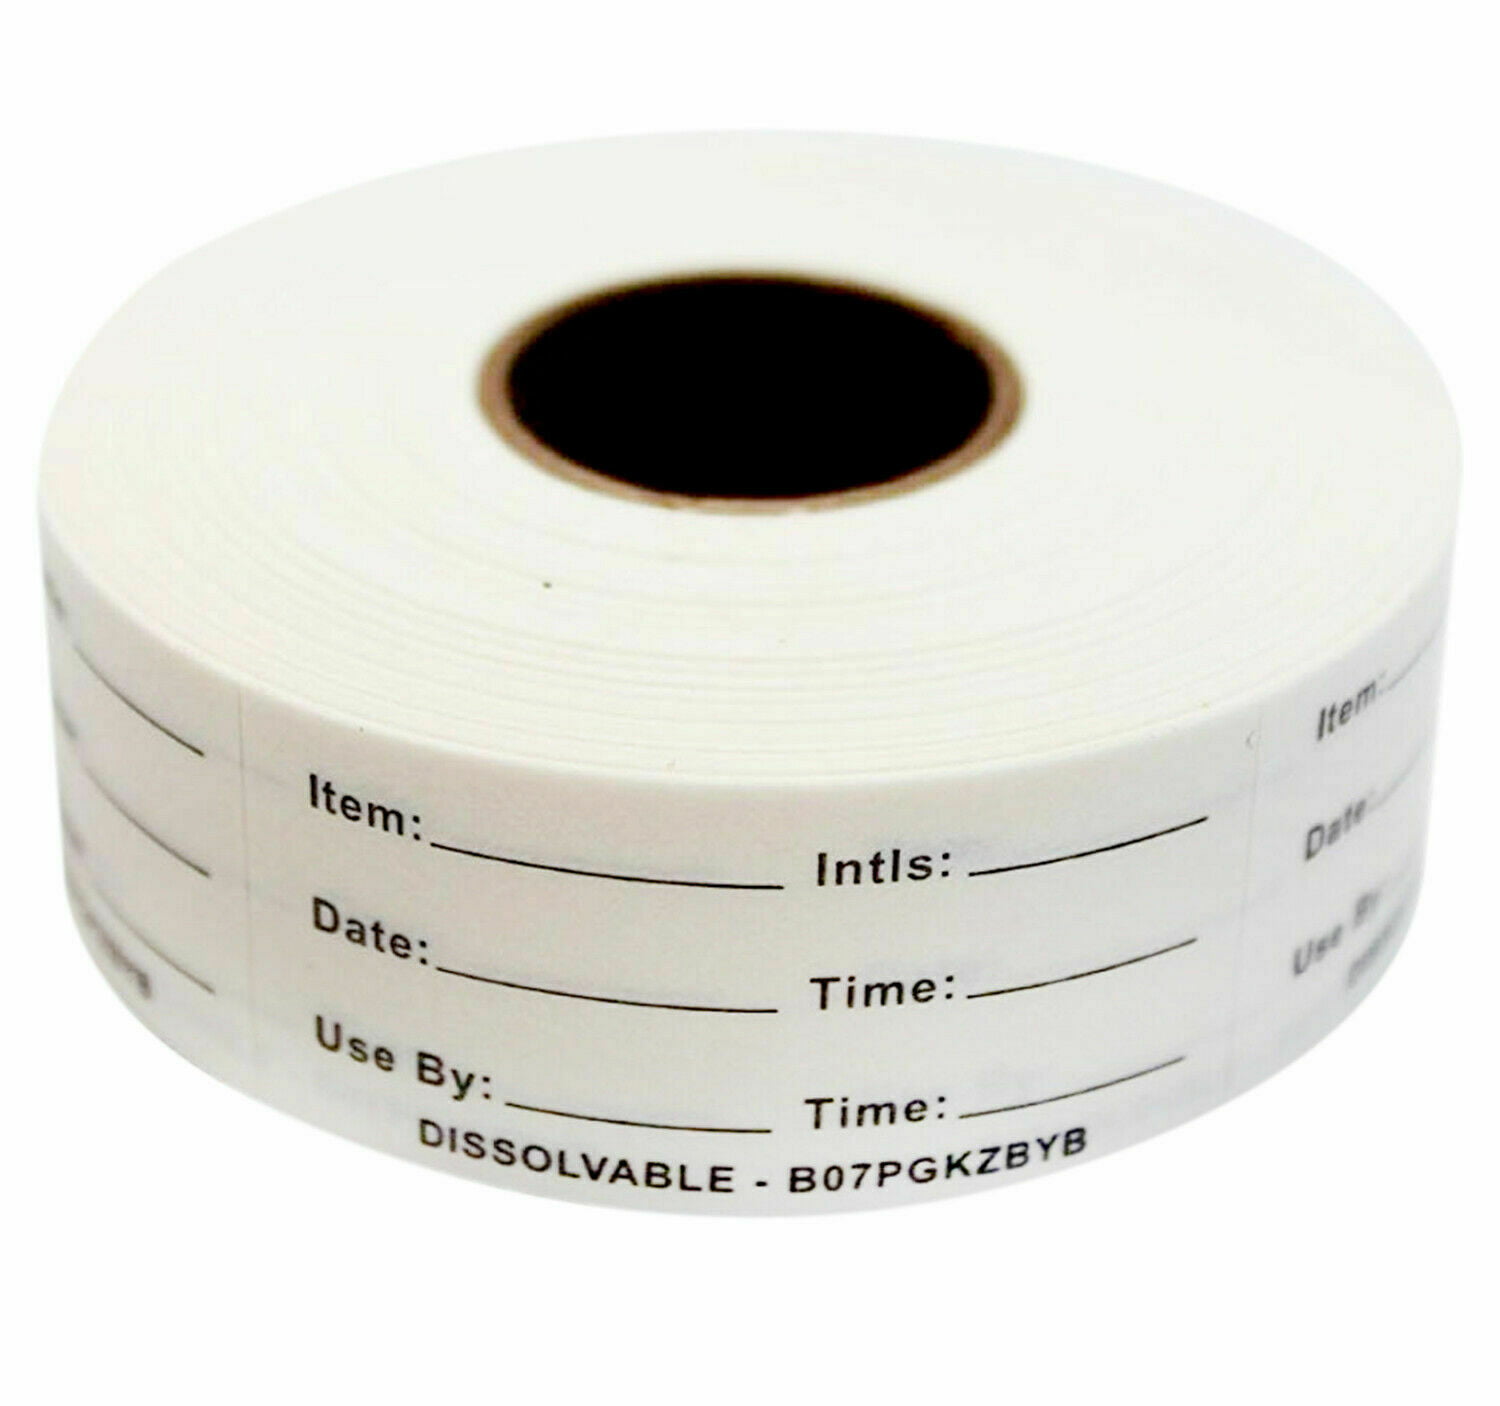 2" ROUND Fresh From The Oven At Write In The Time Food Labels 500 ea per roll 